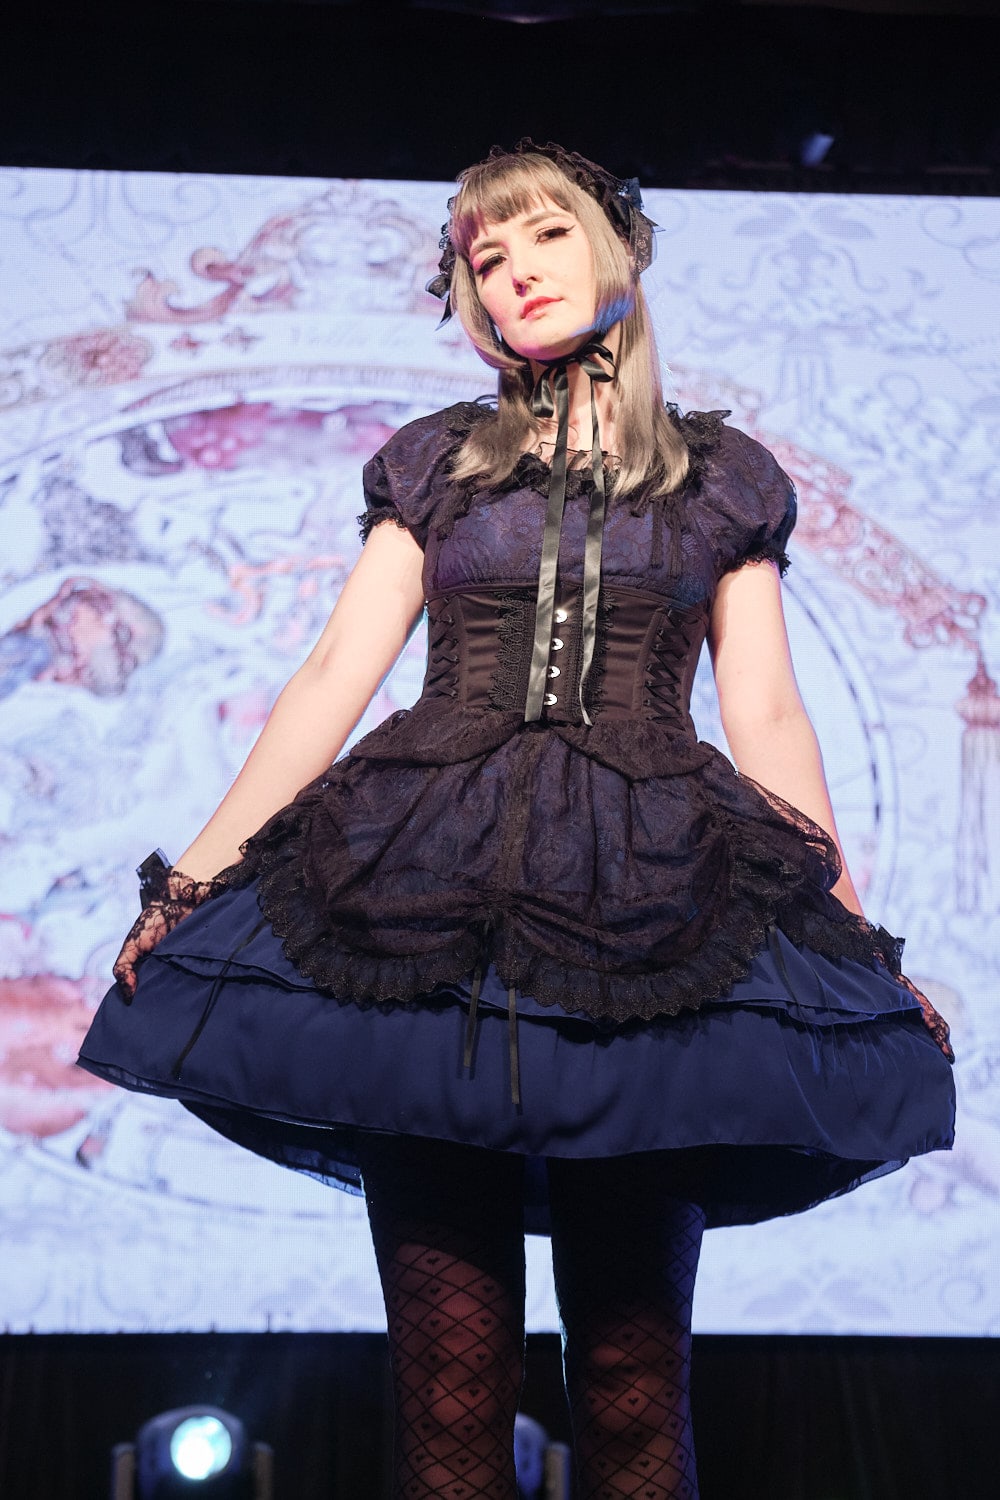 Gothic lolita wearing black and blue short sleeve dress with lace headdress and lace gloves - closeup 2.